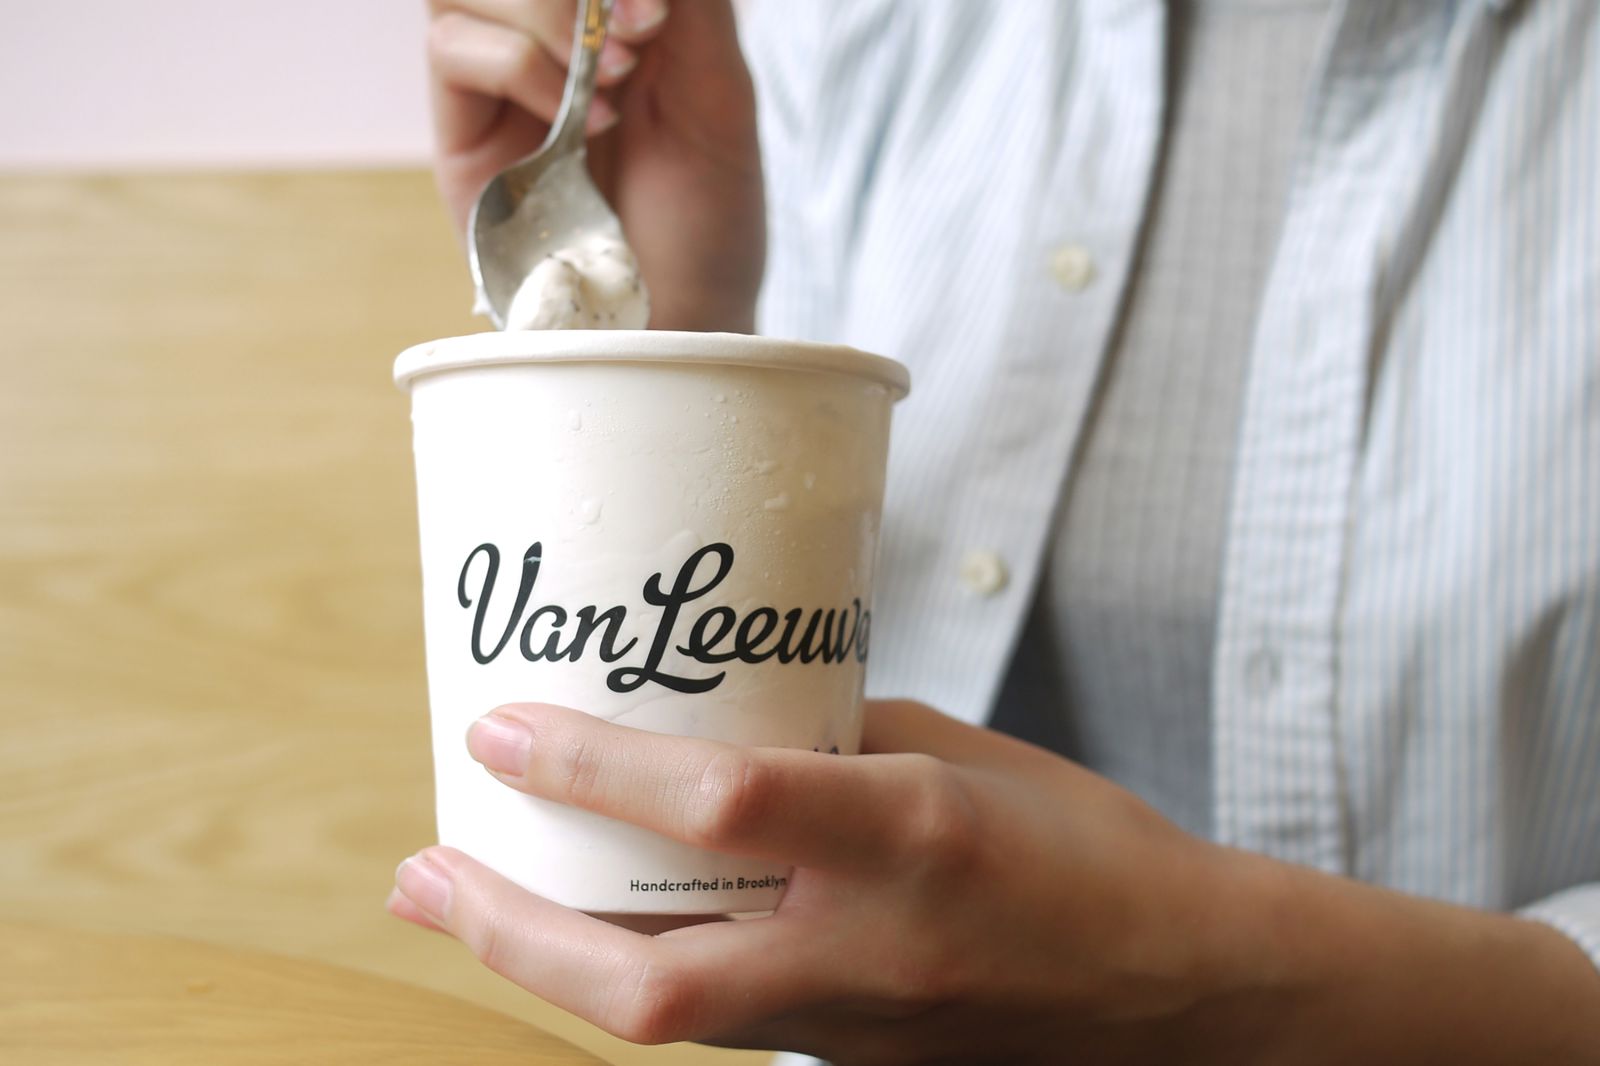 A Brooklyn ice cream brand increased sales by 50% after it redesigned its packaging